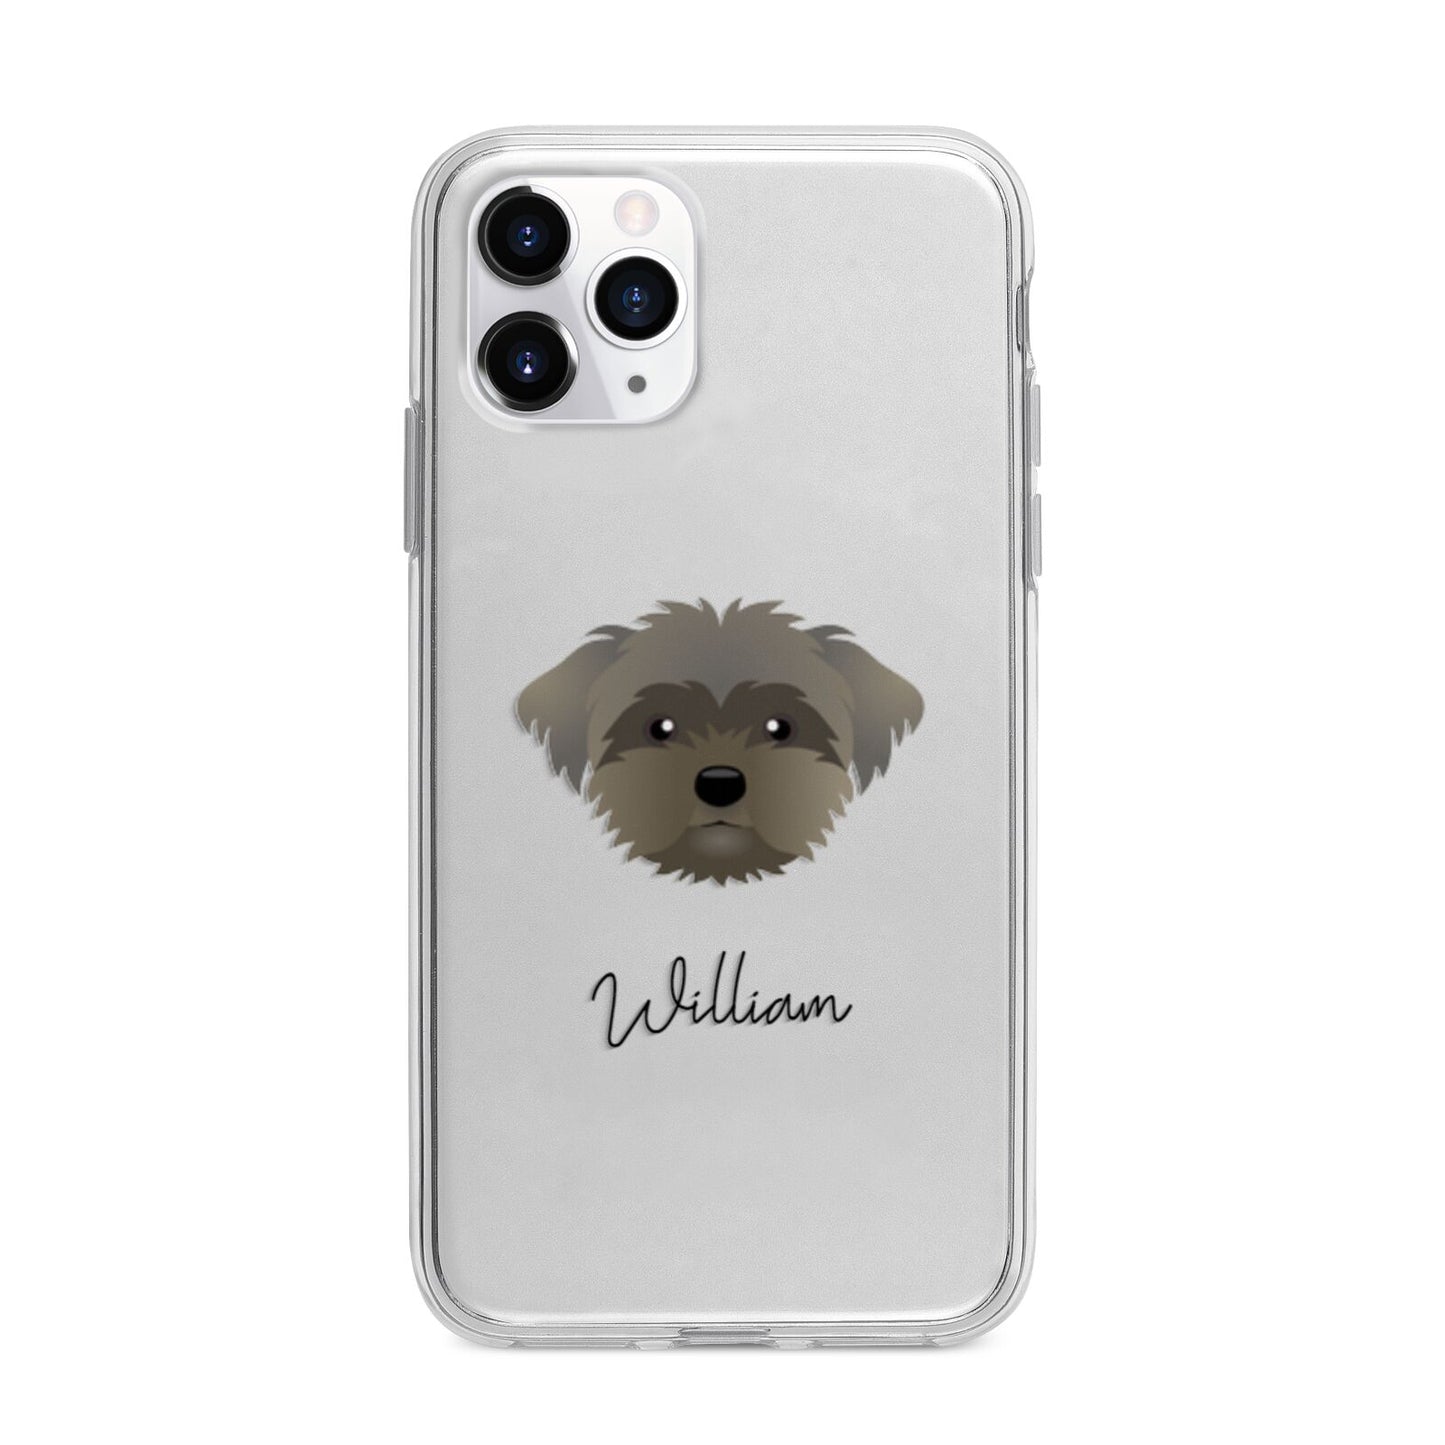 Peek a poo Personalised Apple iPhone 11 Pro in Silver with Bumper Case